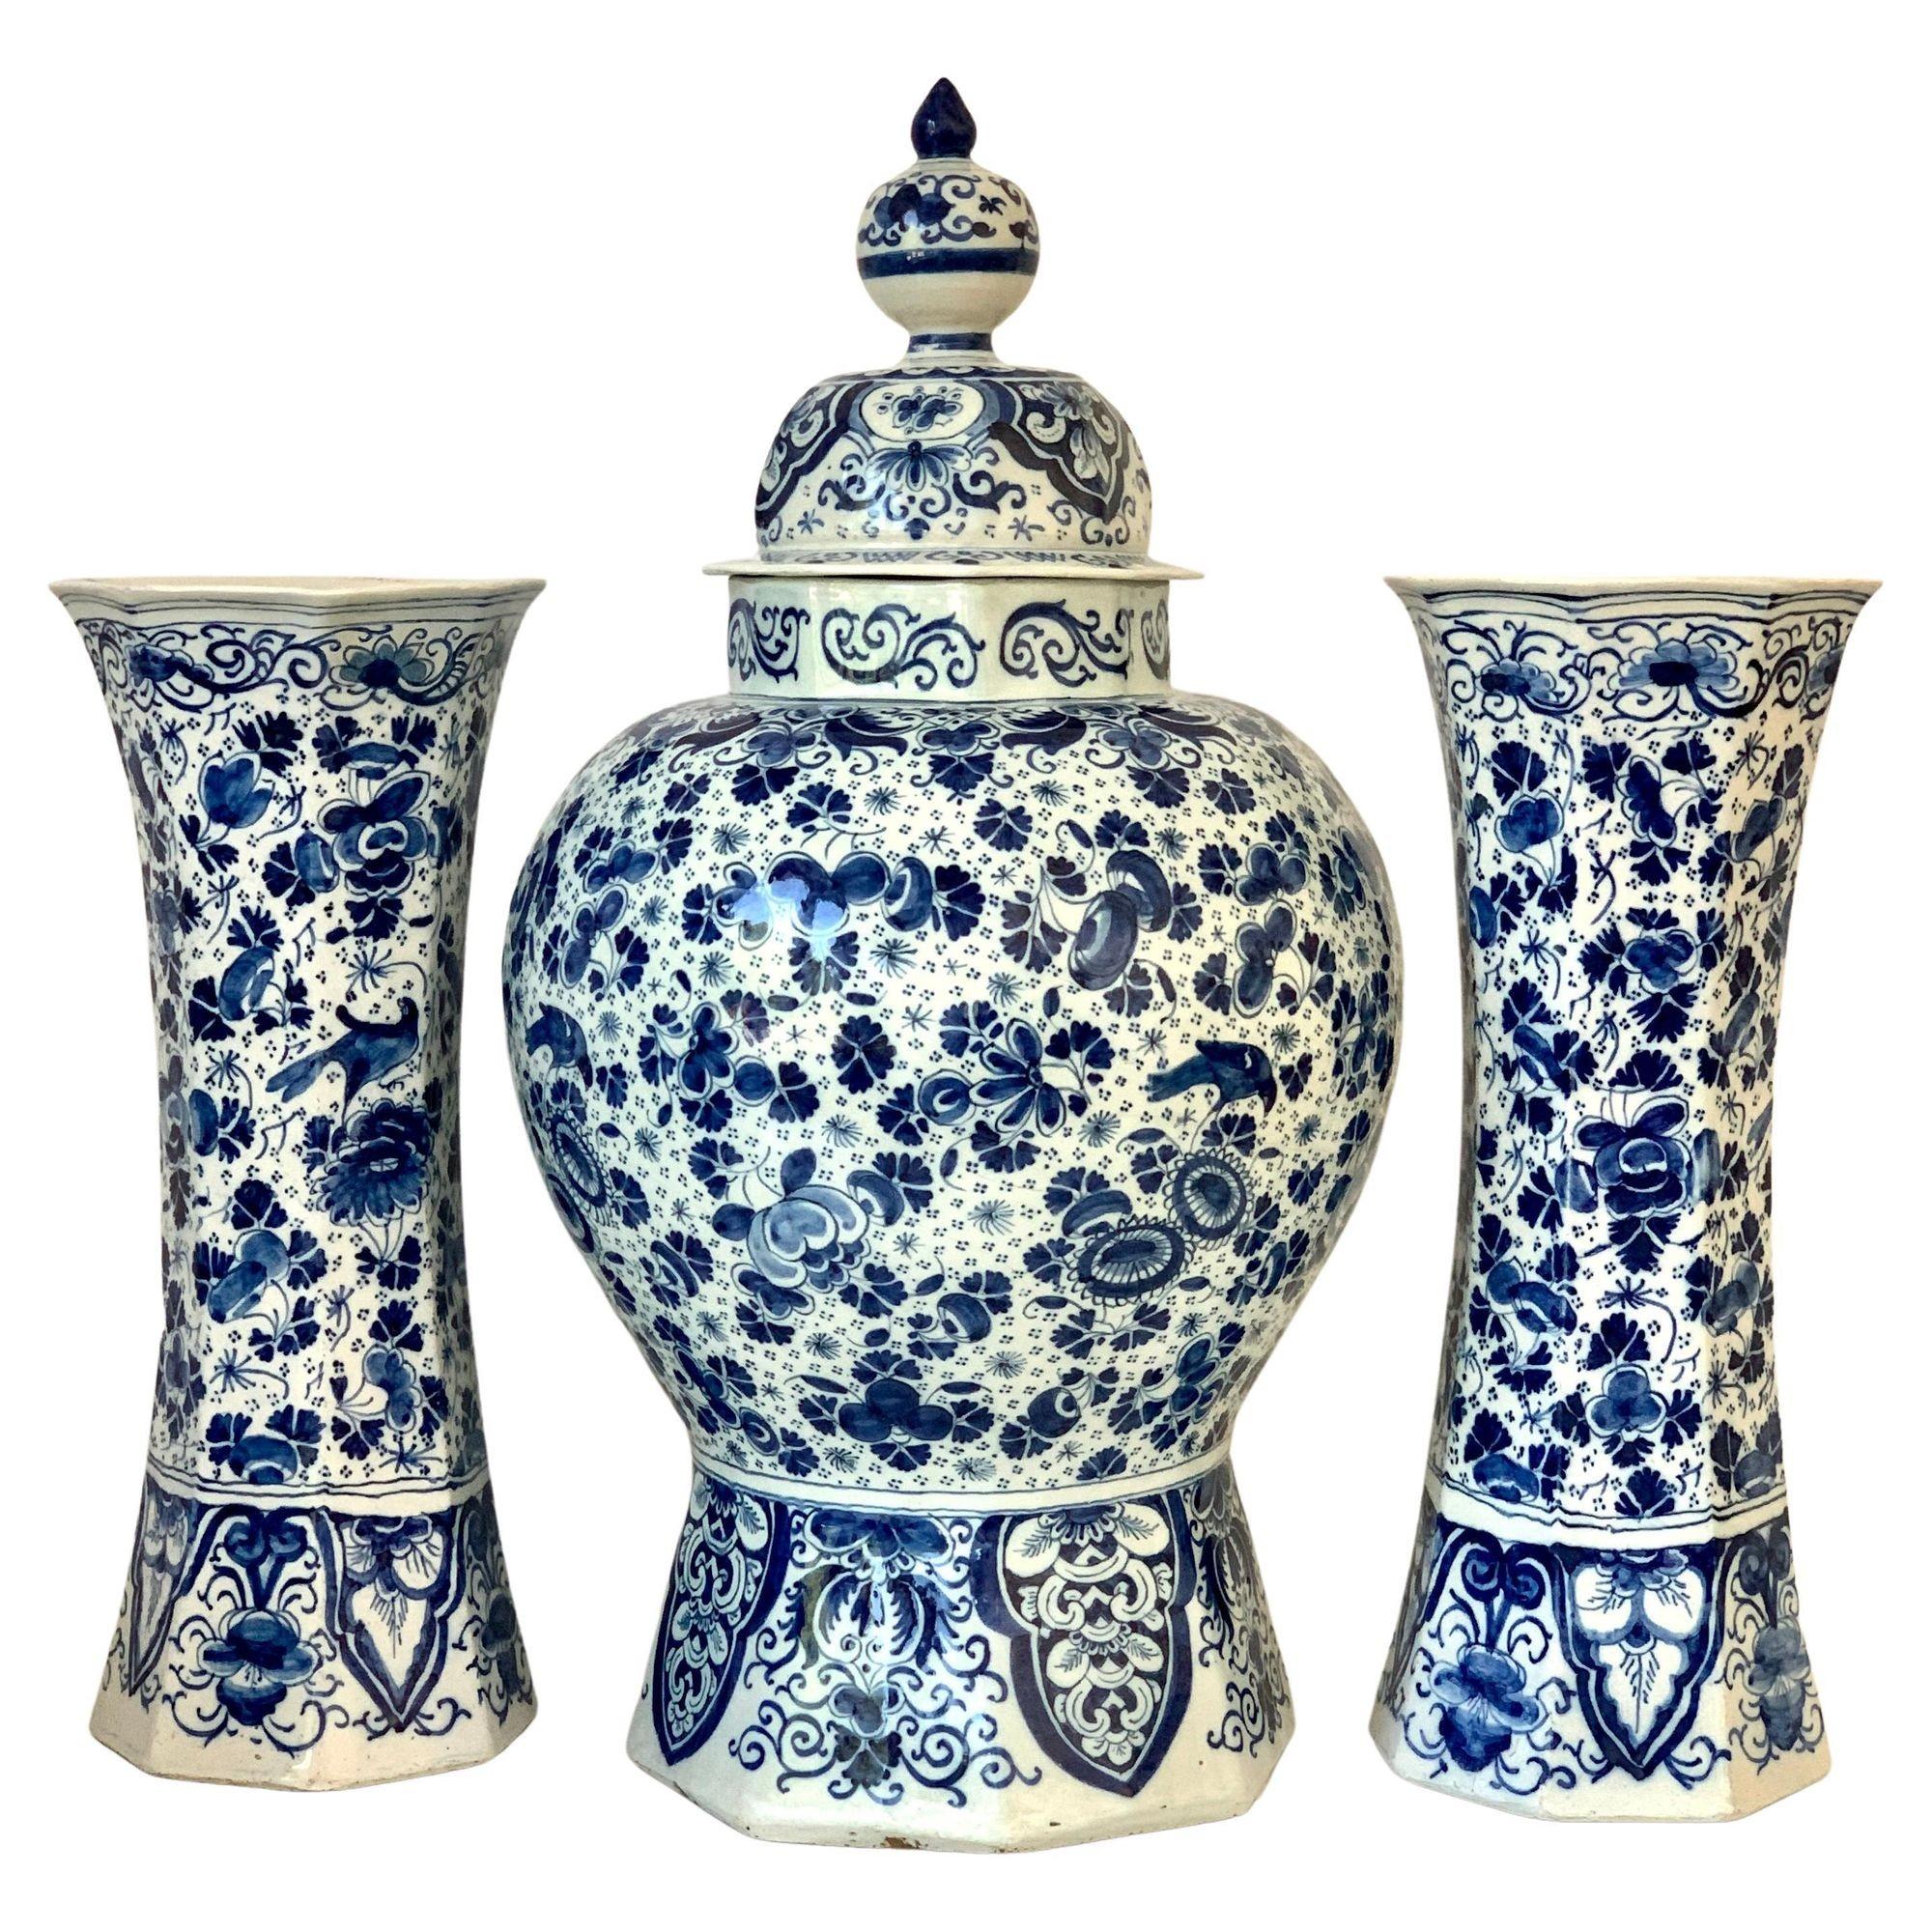 This magnificent blue and white Dutch Delft garniture was hand-painted at De Drie Vergulde Astonnekens (The Three Golden Ash Barrels) three hundred years ago.
This group consists of a single covered jar, a pair of gourd-shaped vases, and a pair of